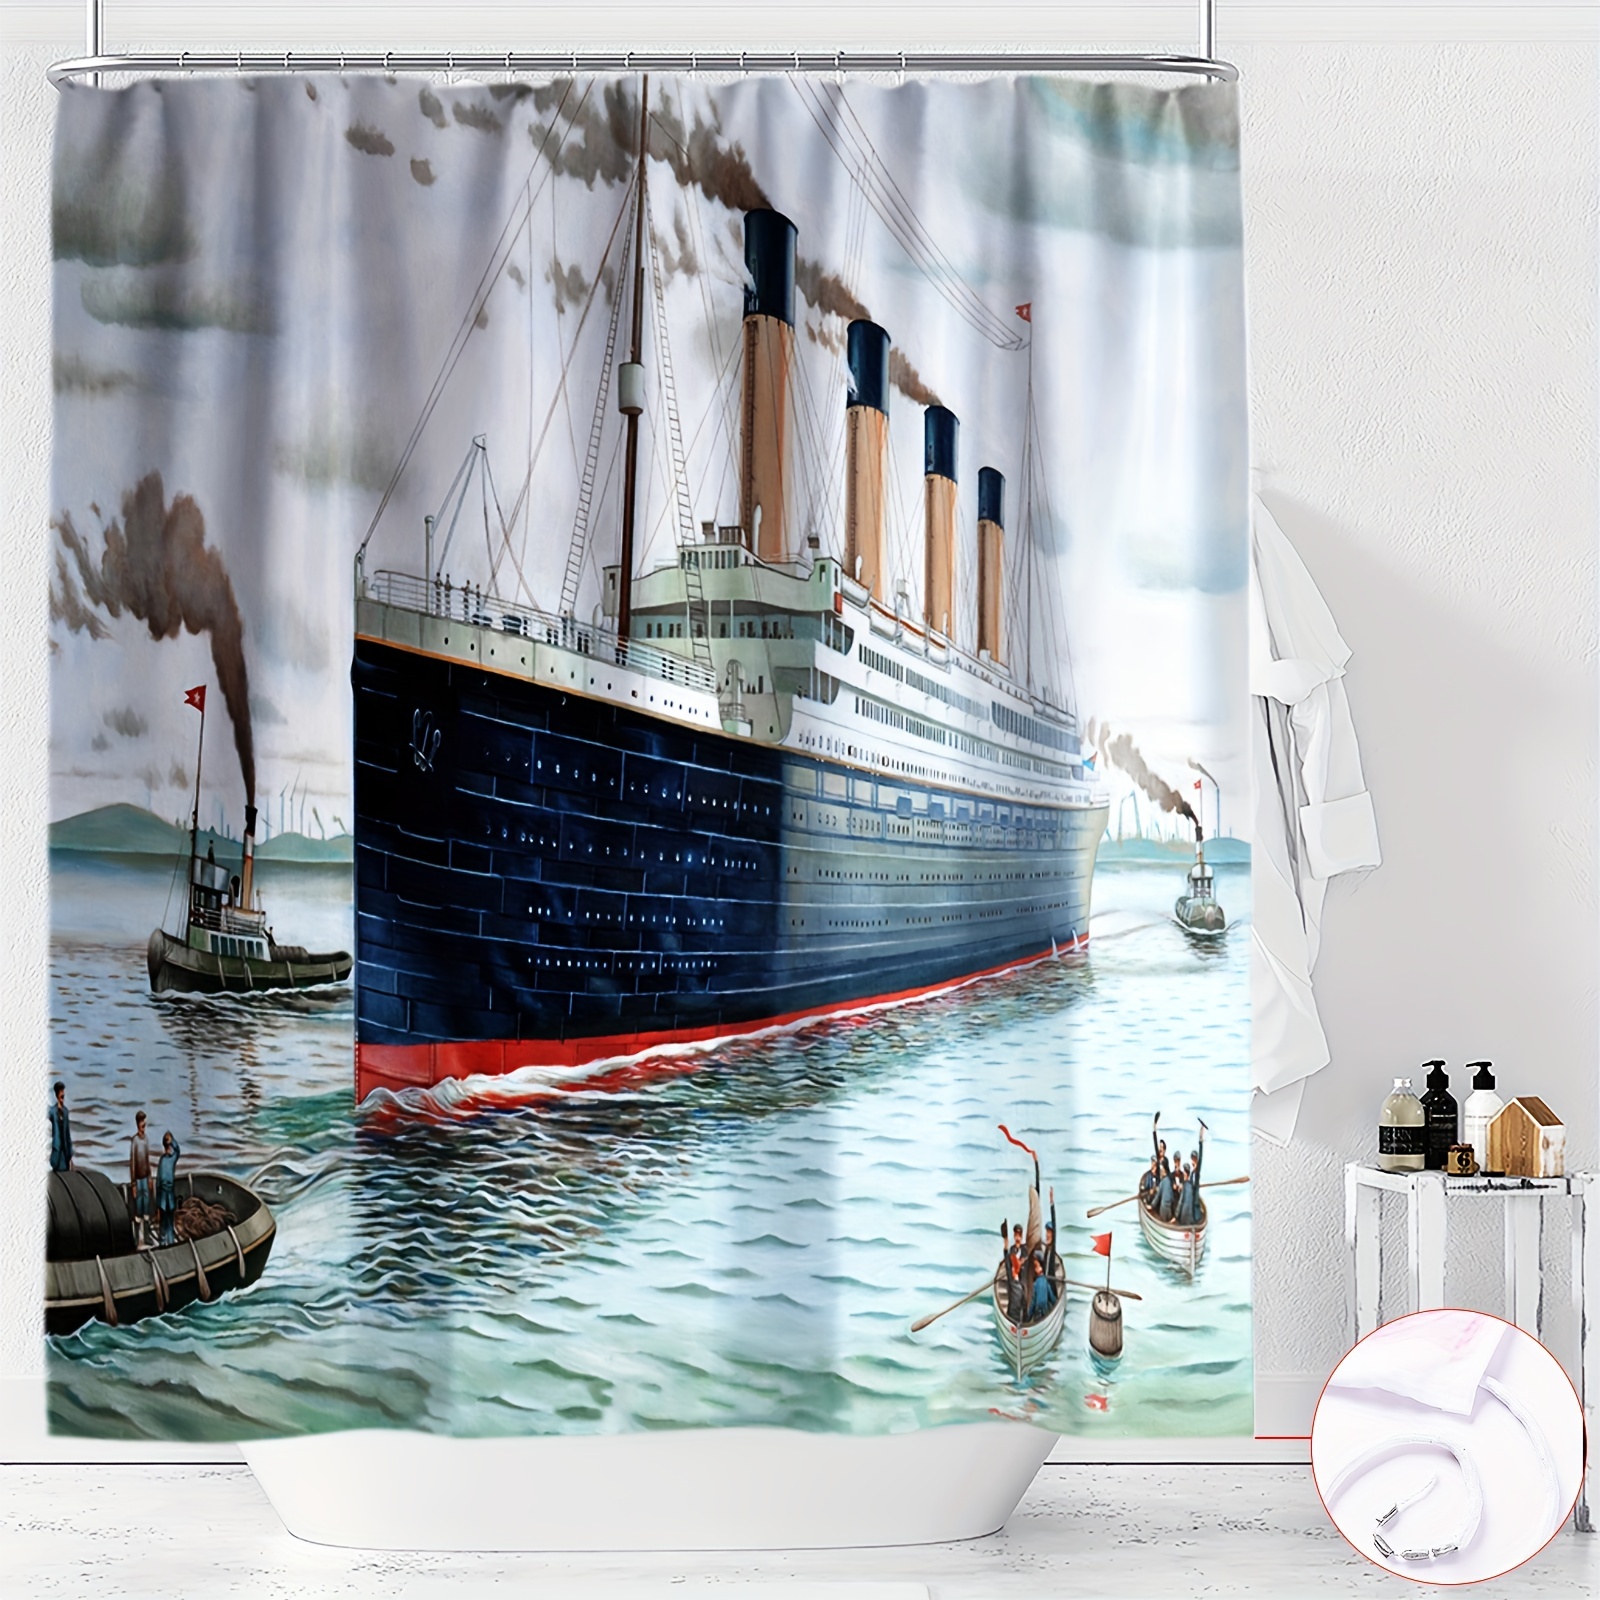 

Nautical Themed Shower Curtain With Digital Print Ocean Liner Design, Ywjhui Water-resistant Polyester Bathroom Decor With Hooks, All-season Knit Weave, Machine Washable, Partially Lined - 1pc